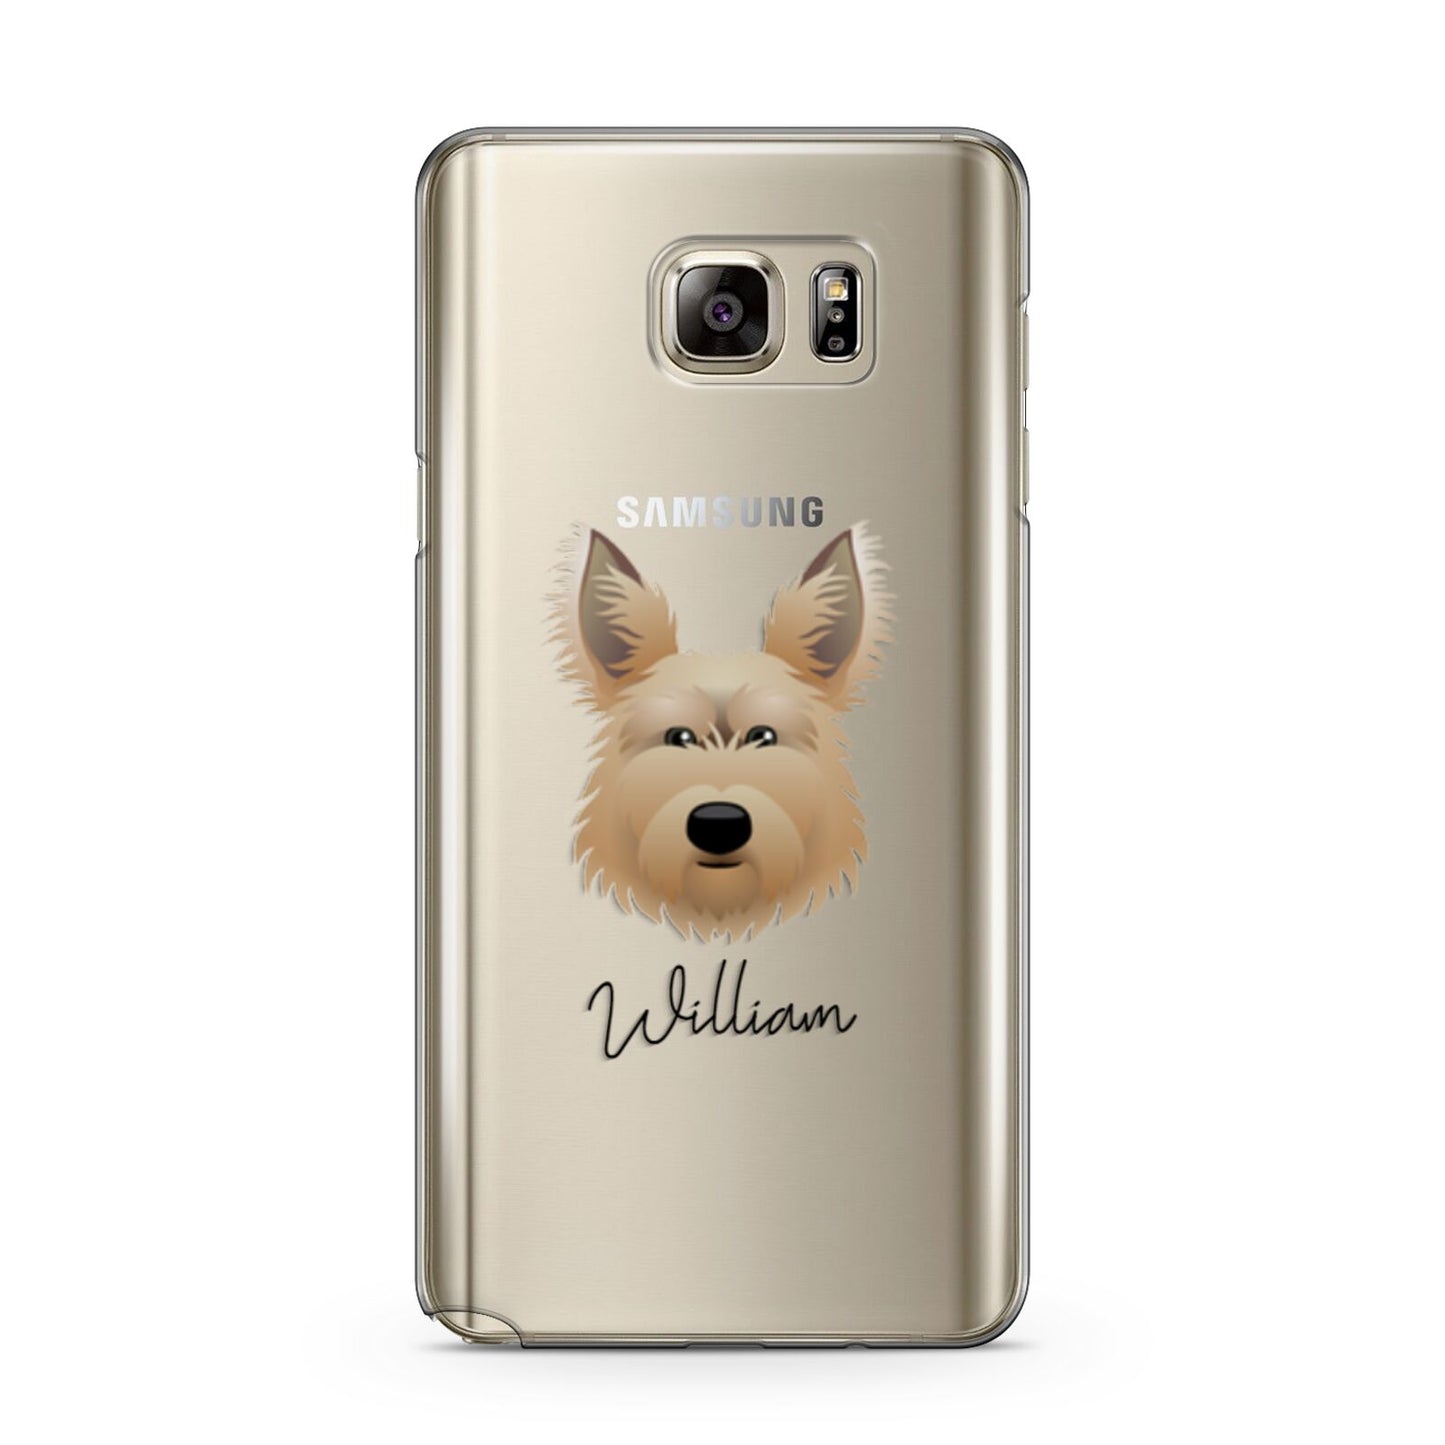 Picardy Sheepdog Personalised Samsung Galaxy Note 5 Case